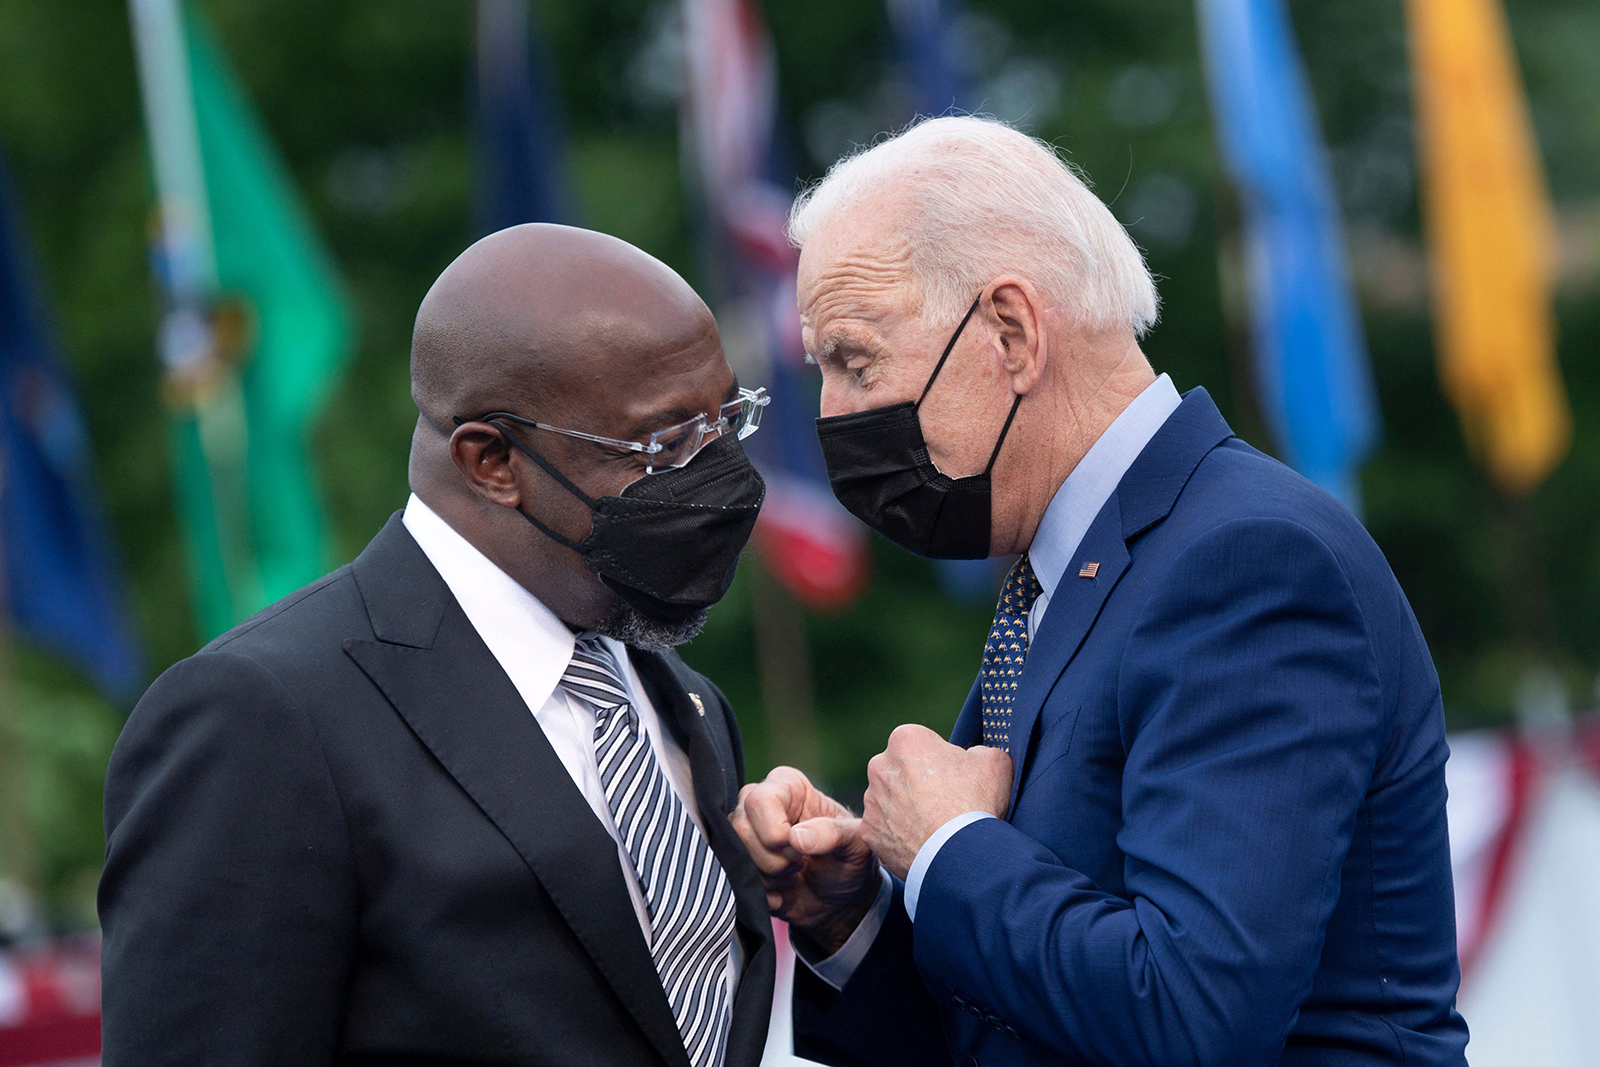 U.S. Sen. Raphael Warnock, left, is in a close race with Republican Herschel Walker in the newest Atlanta Journal-Constitution poll. Meanwhile, President Joe Biden is underwater, with 60% saying they somewhat or strongly disapprove of his job performance. (Brendan Smialowski/AFP via Getty Images/TNS)